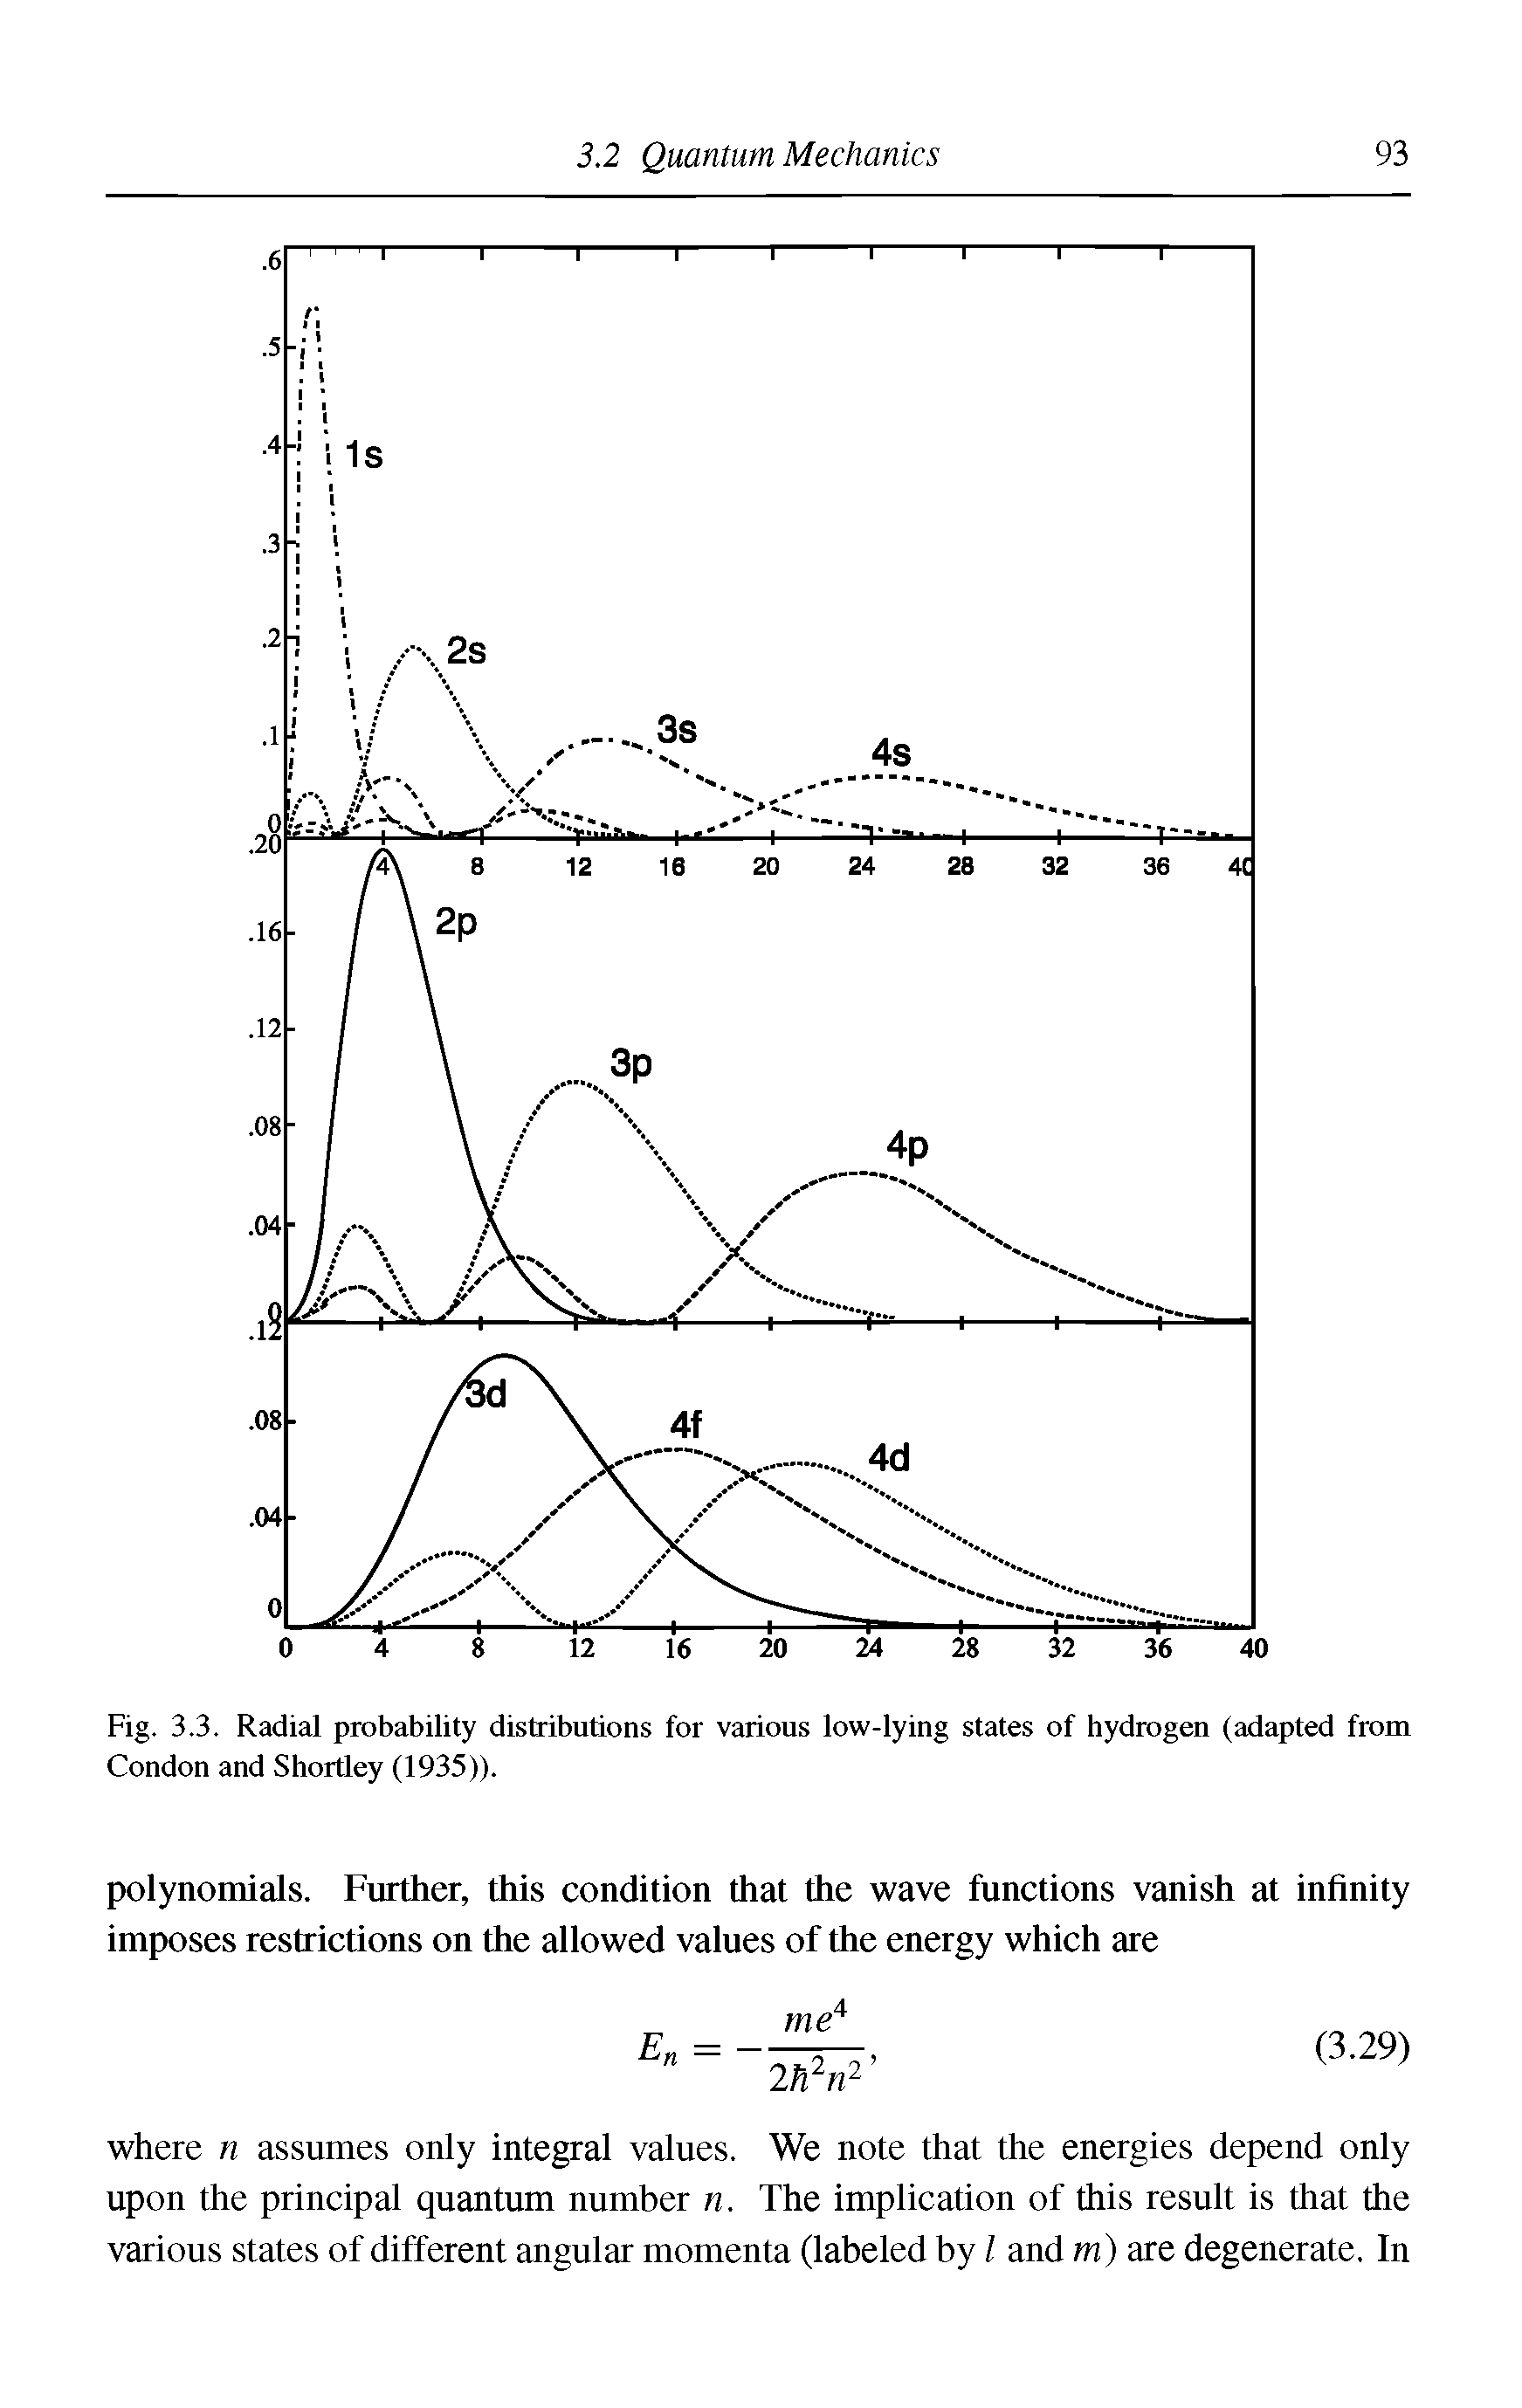 Fig. 3.3. Radial probability distributions for various low-lying states of hydrogen (adapted from Condon and Shortley (1935)).